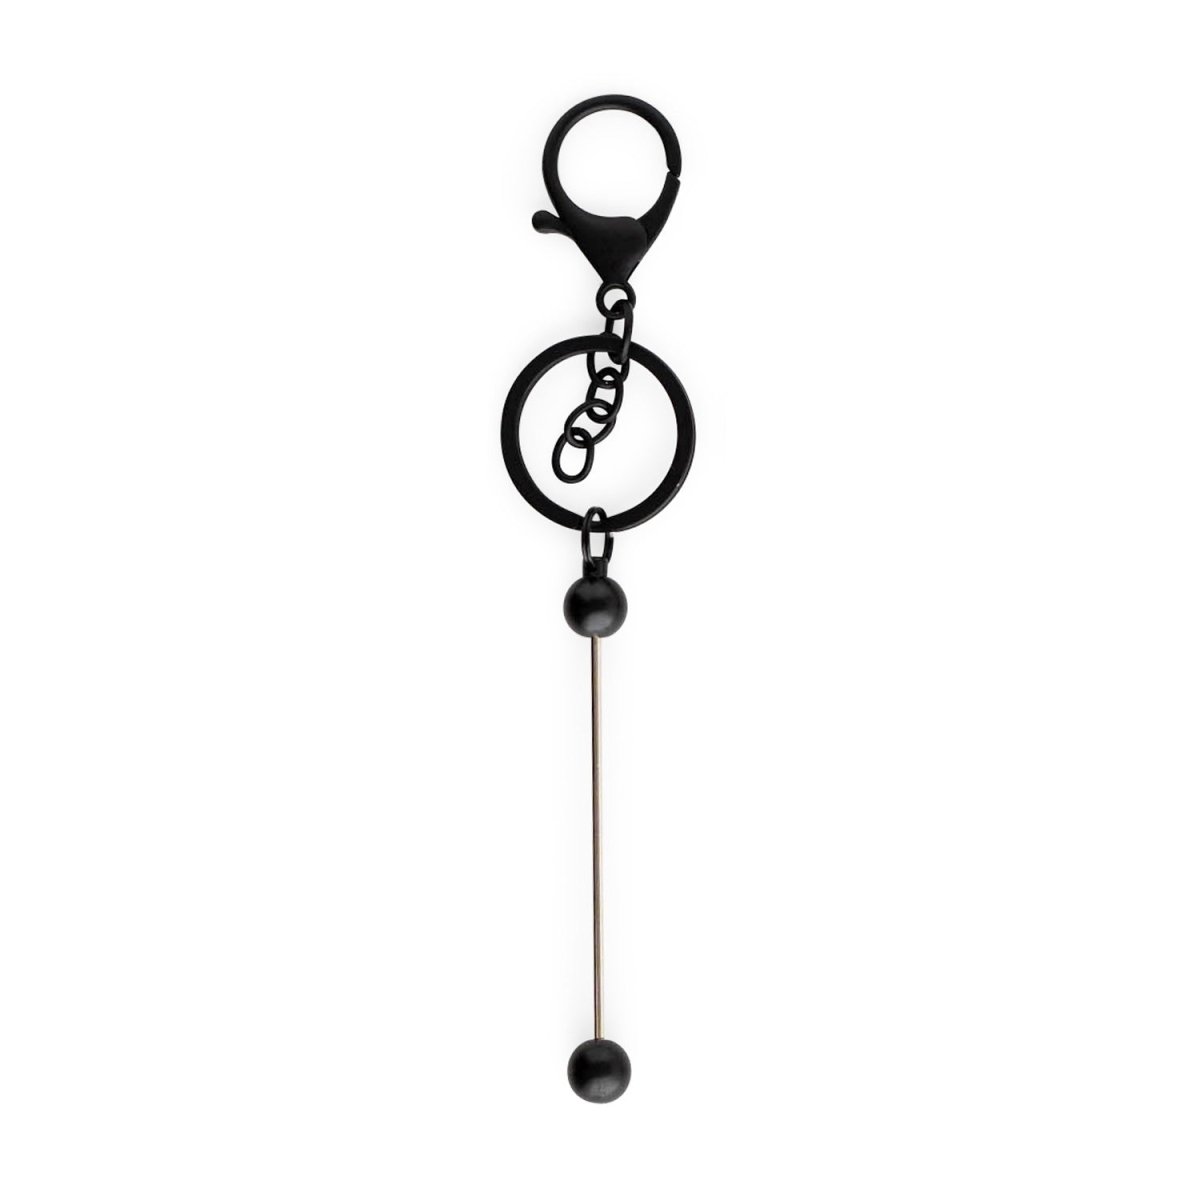 Beadables Premium Beadable Bar Keychains Matte Black from Cara & Co Craft Supply